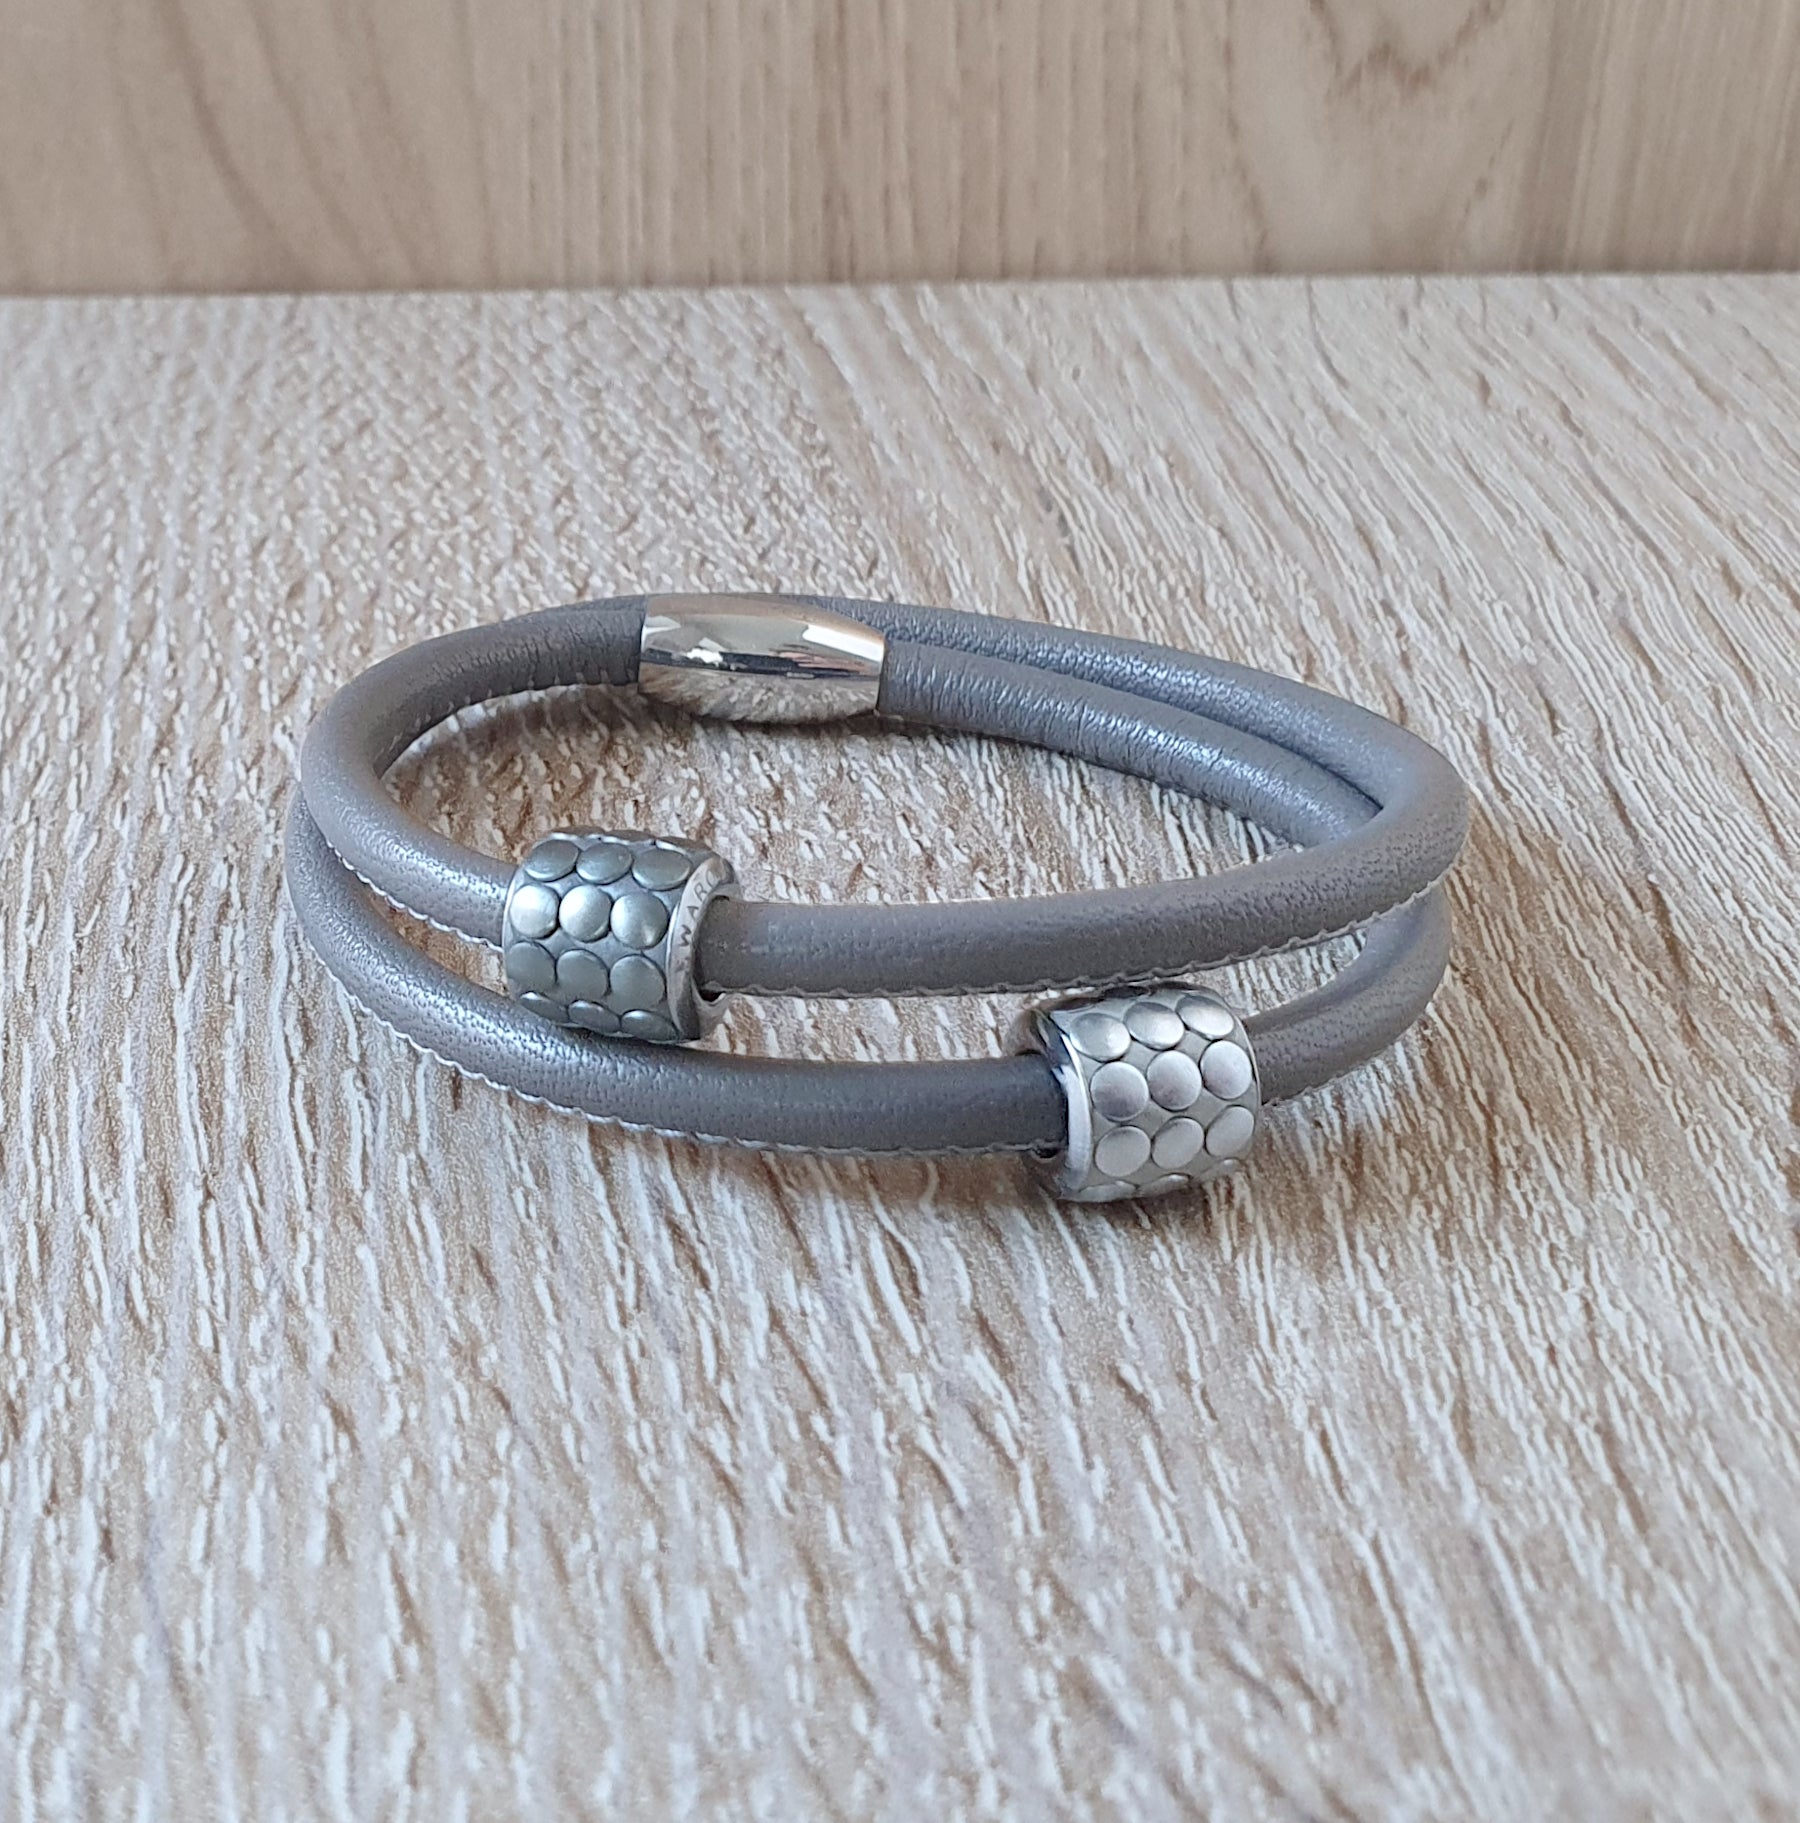 Buy Genuine Braided Leather Bracelet With Stainless Steel, Large Wrist  Bracelet, Plus Size Leather Bracelet, Big Man Gifts for Dad,xl Gifts Men  Online in India - Etsy